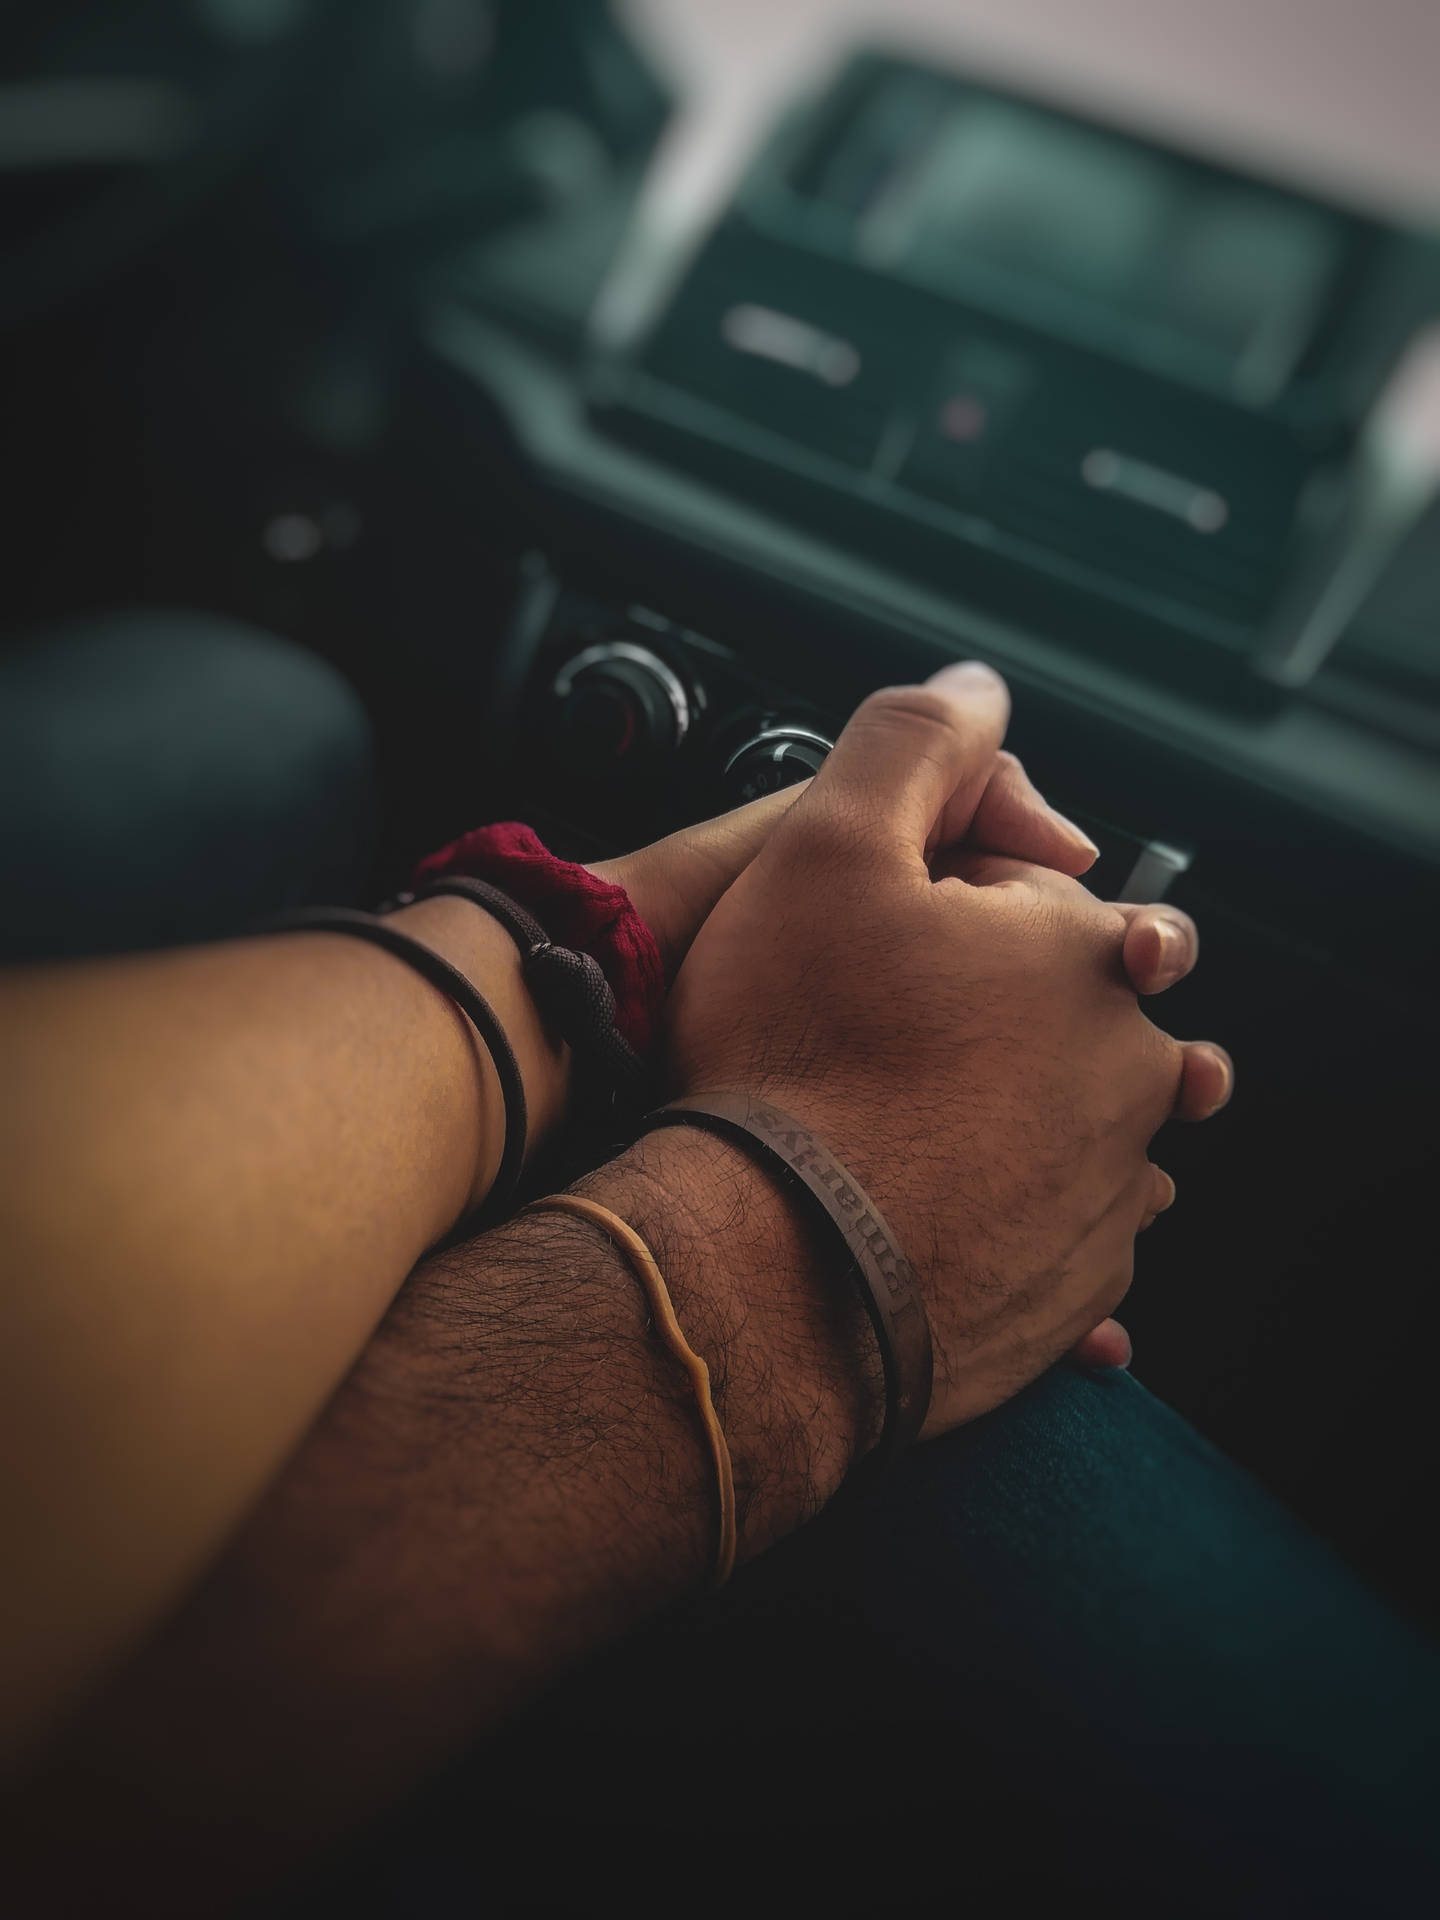 Holding Hands In The Car